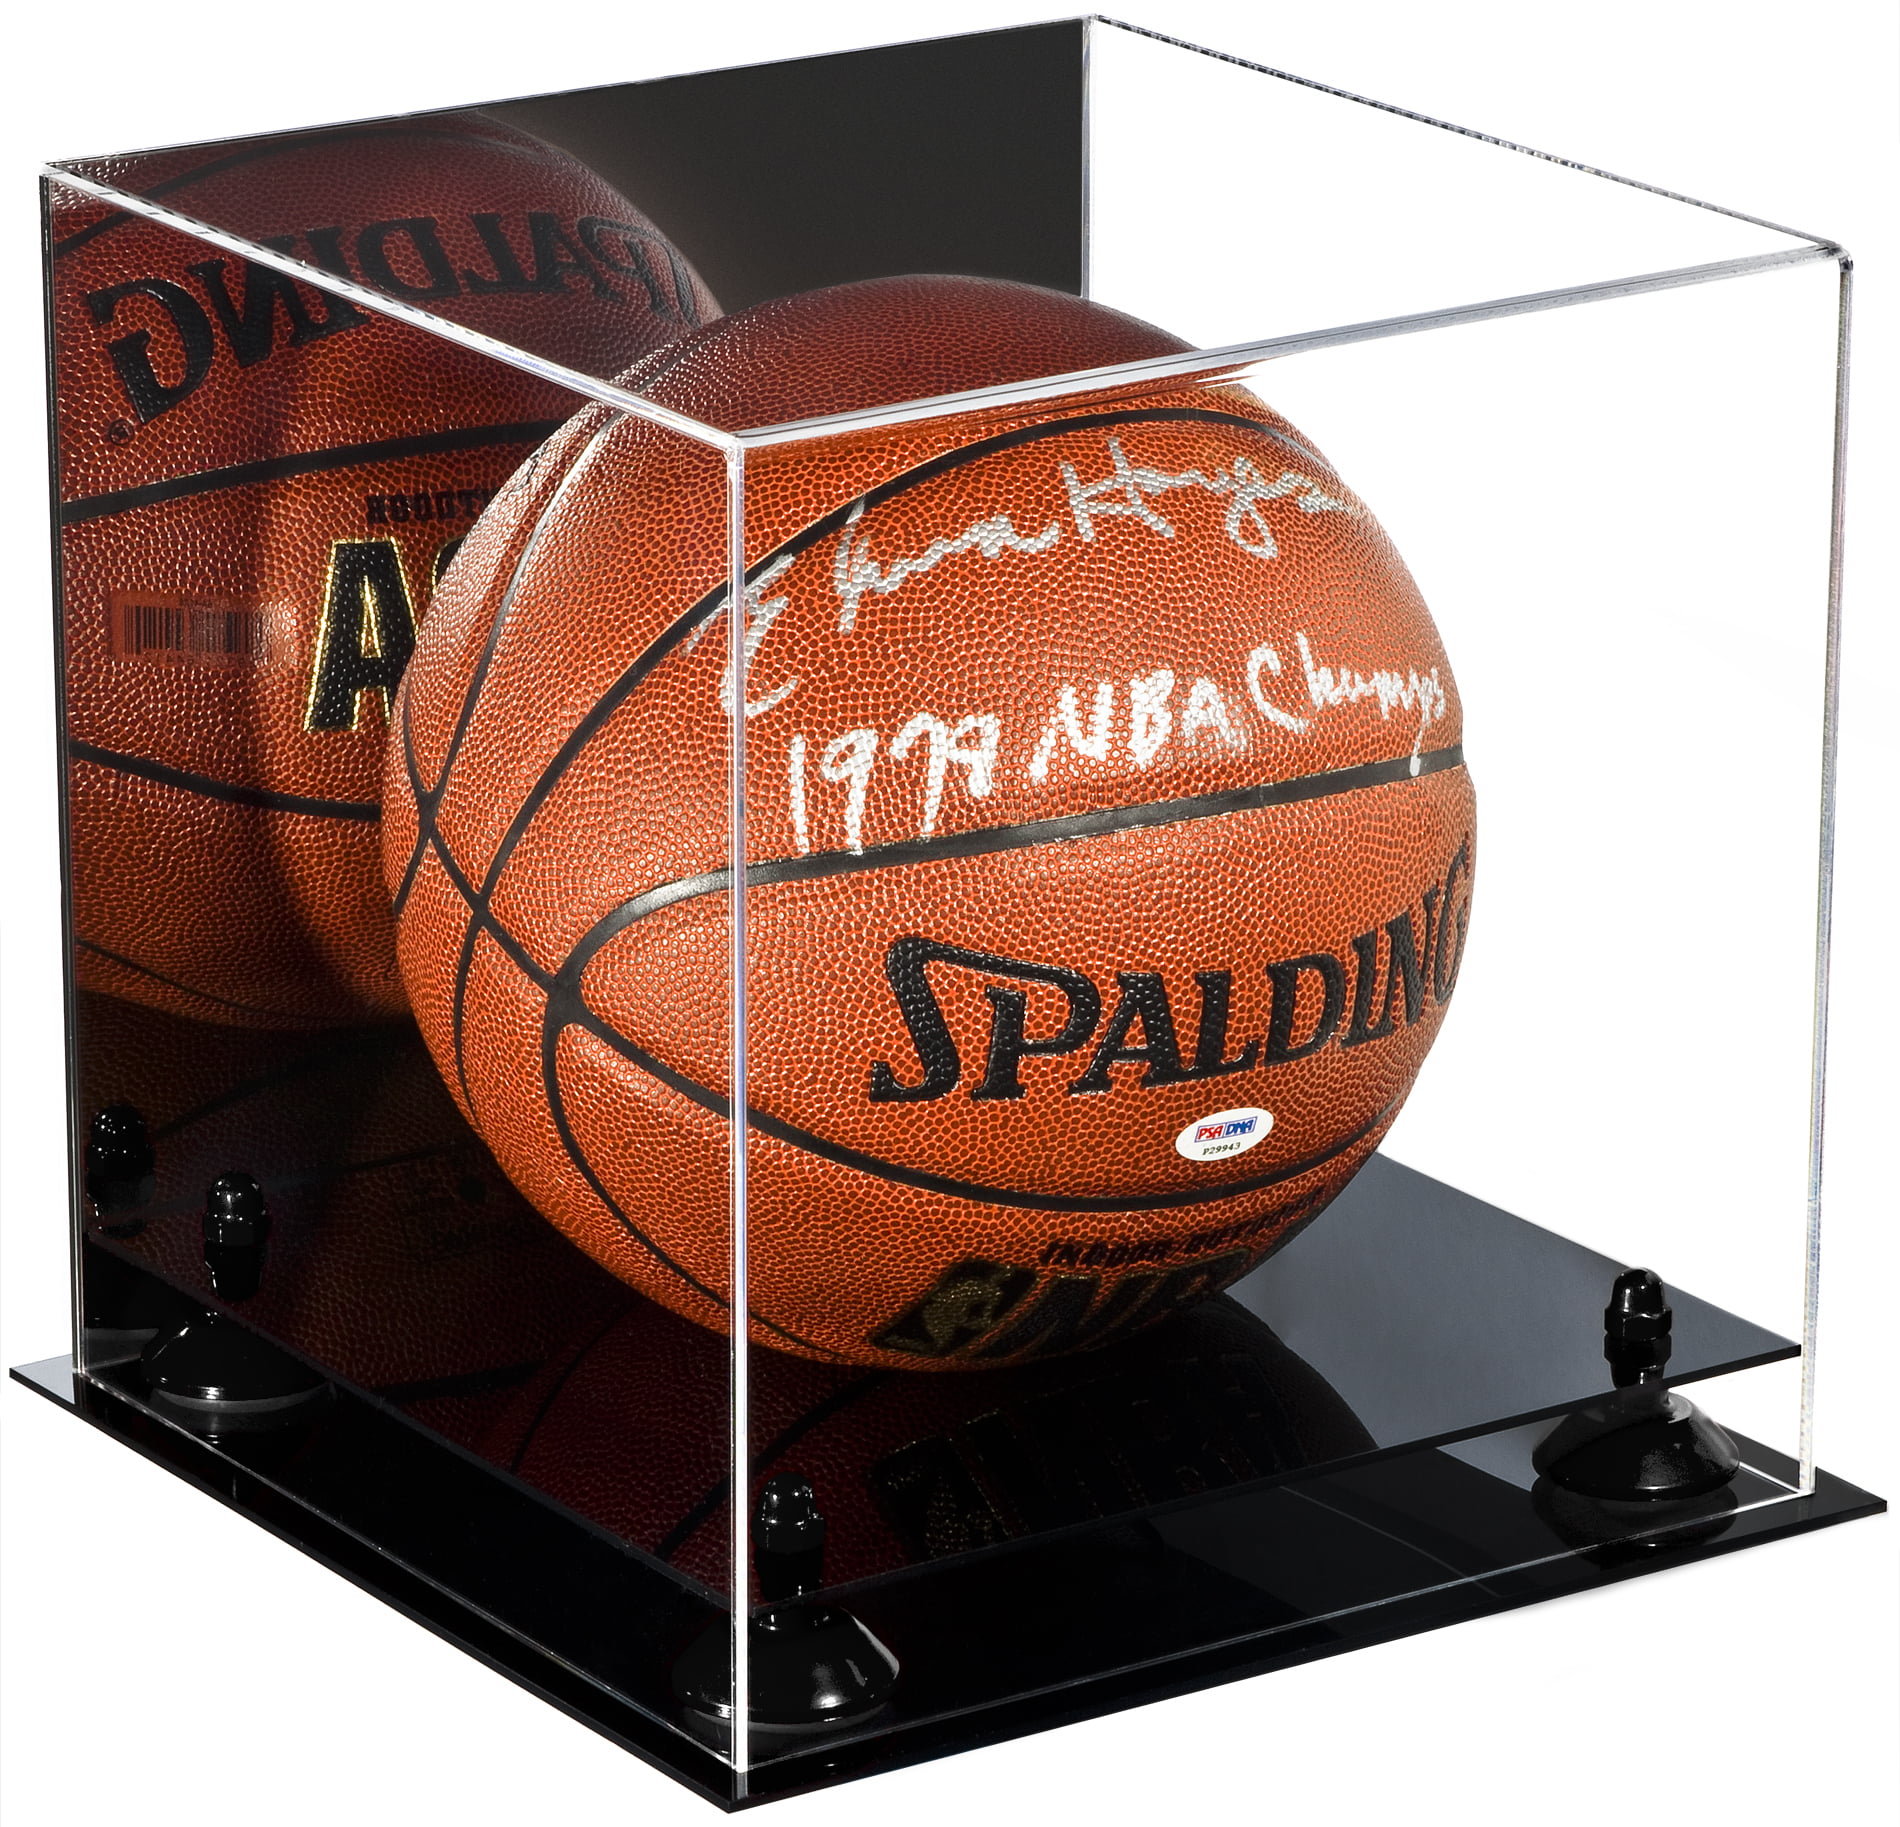 Acrylic Full Size Basketball Display Case Stand with Wood Floor and Mirror 